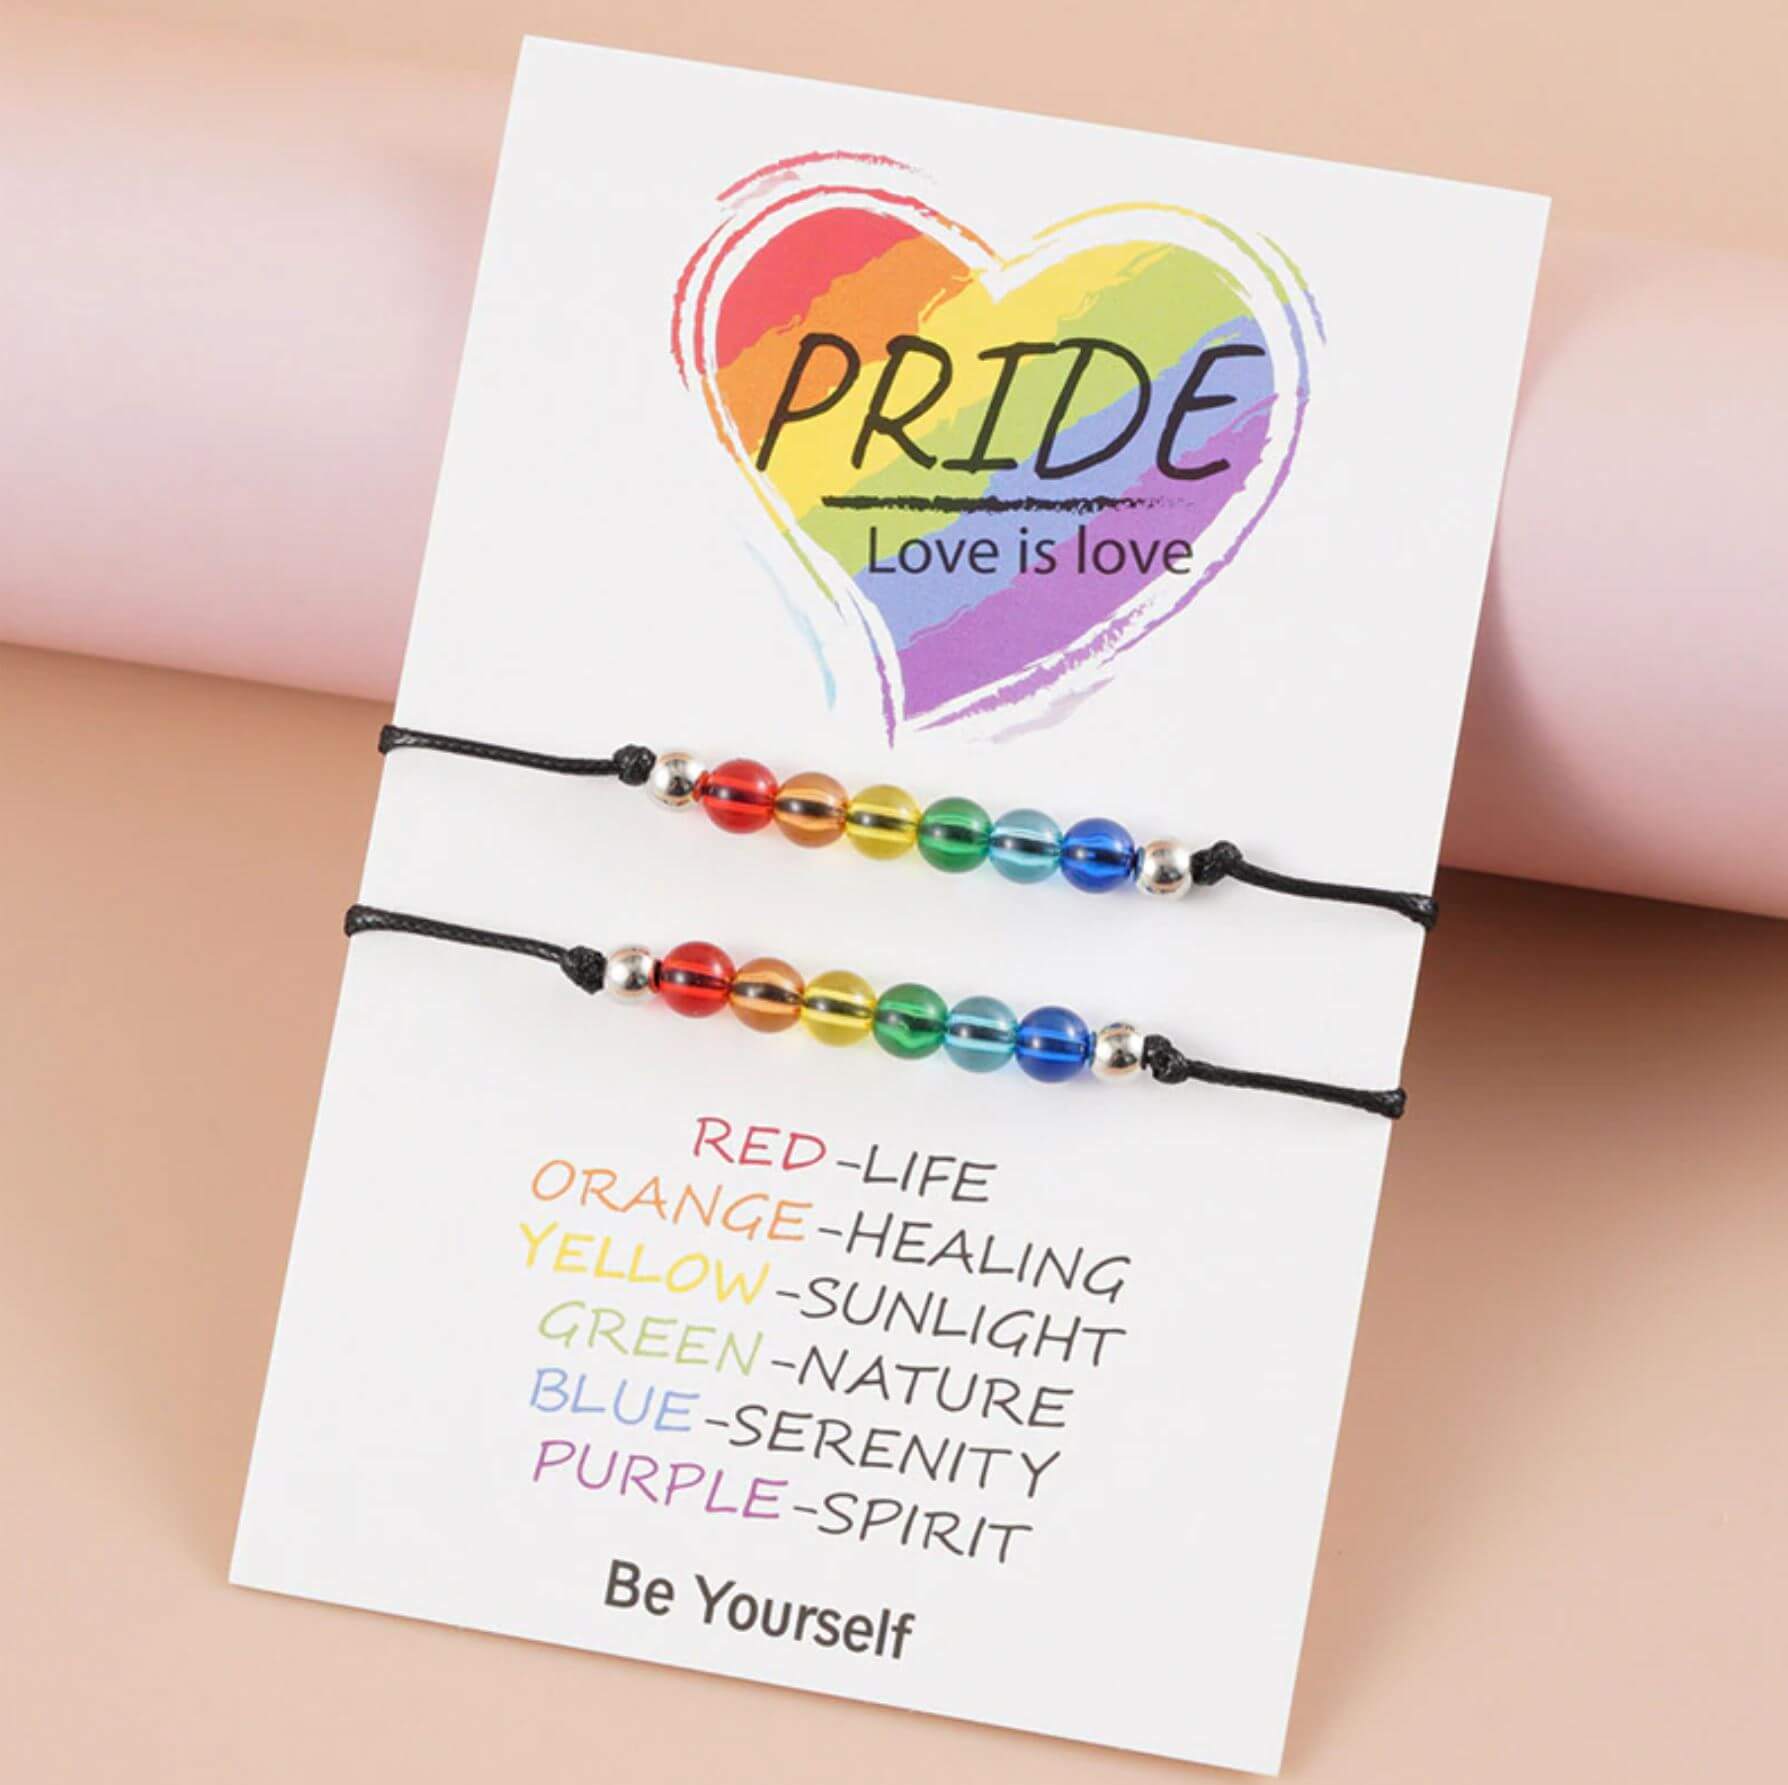 Two matching rainbow friendship bracelets for best friends to share pride